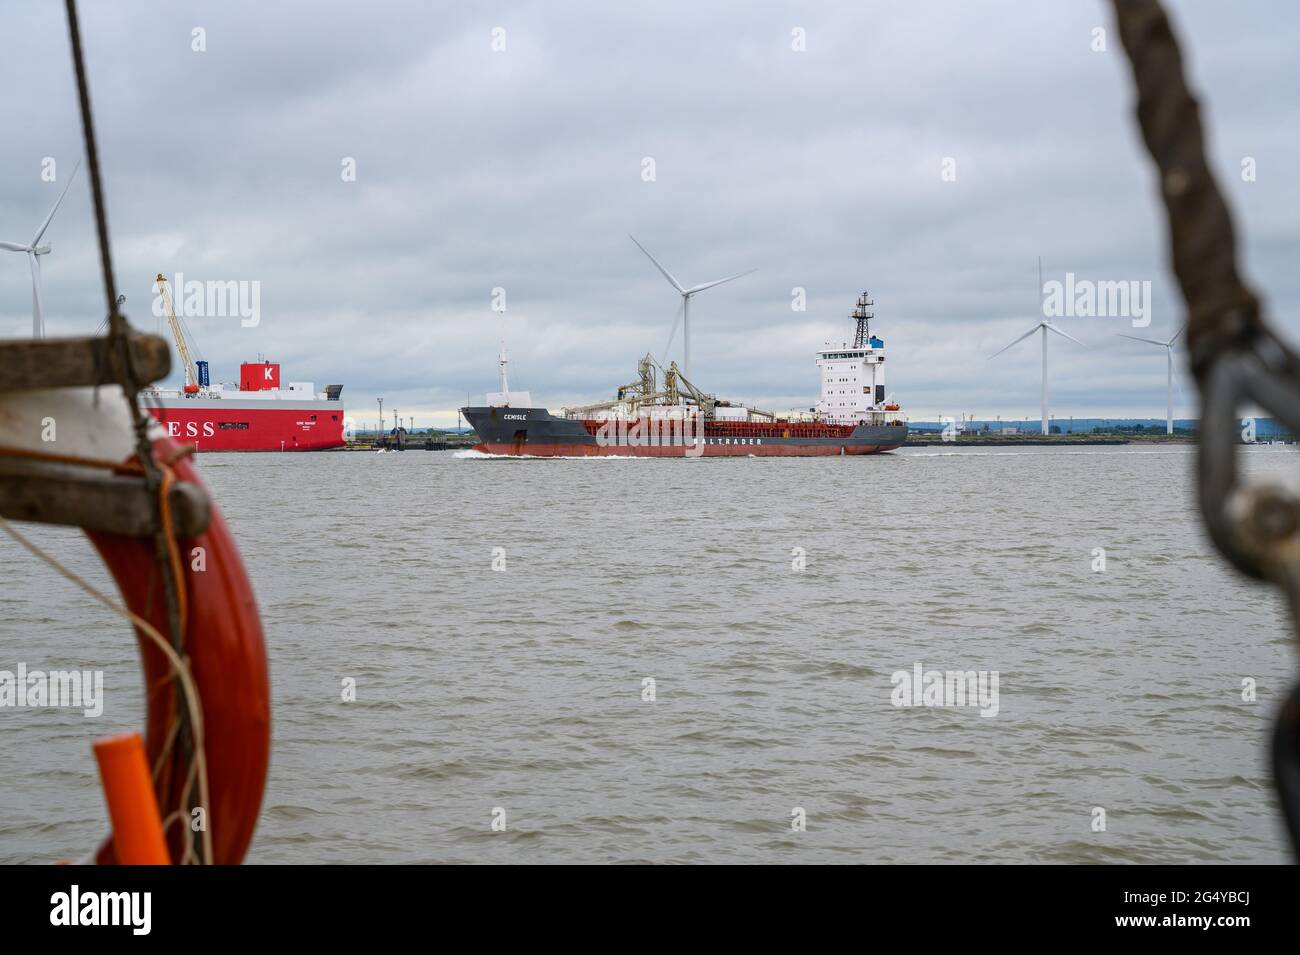 'Cemisle' cement carrier ship, operated by Baltrader, passing the port on Isle of Sheppey on river Medway in the Thames estuary, Kent, England. Stock Photo